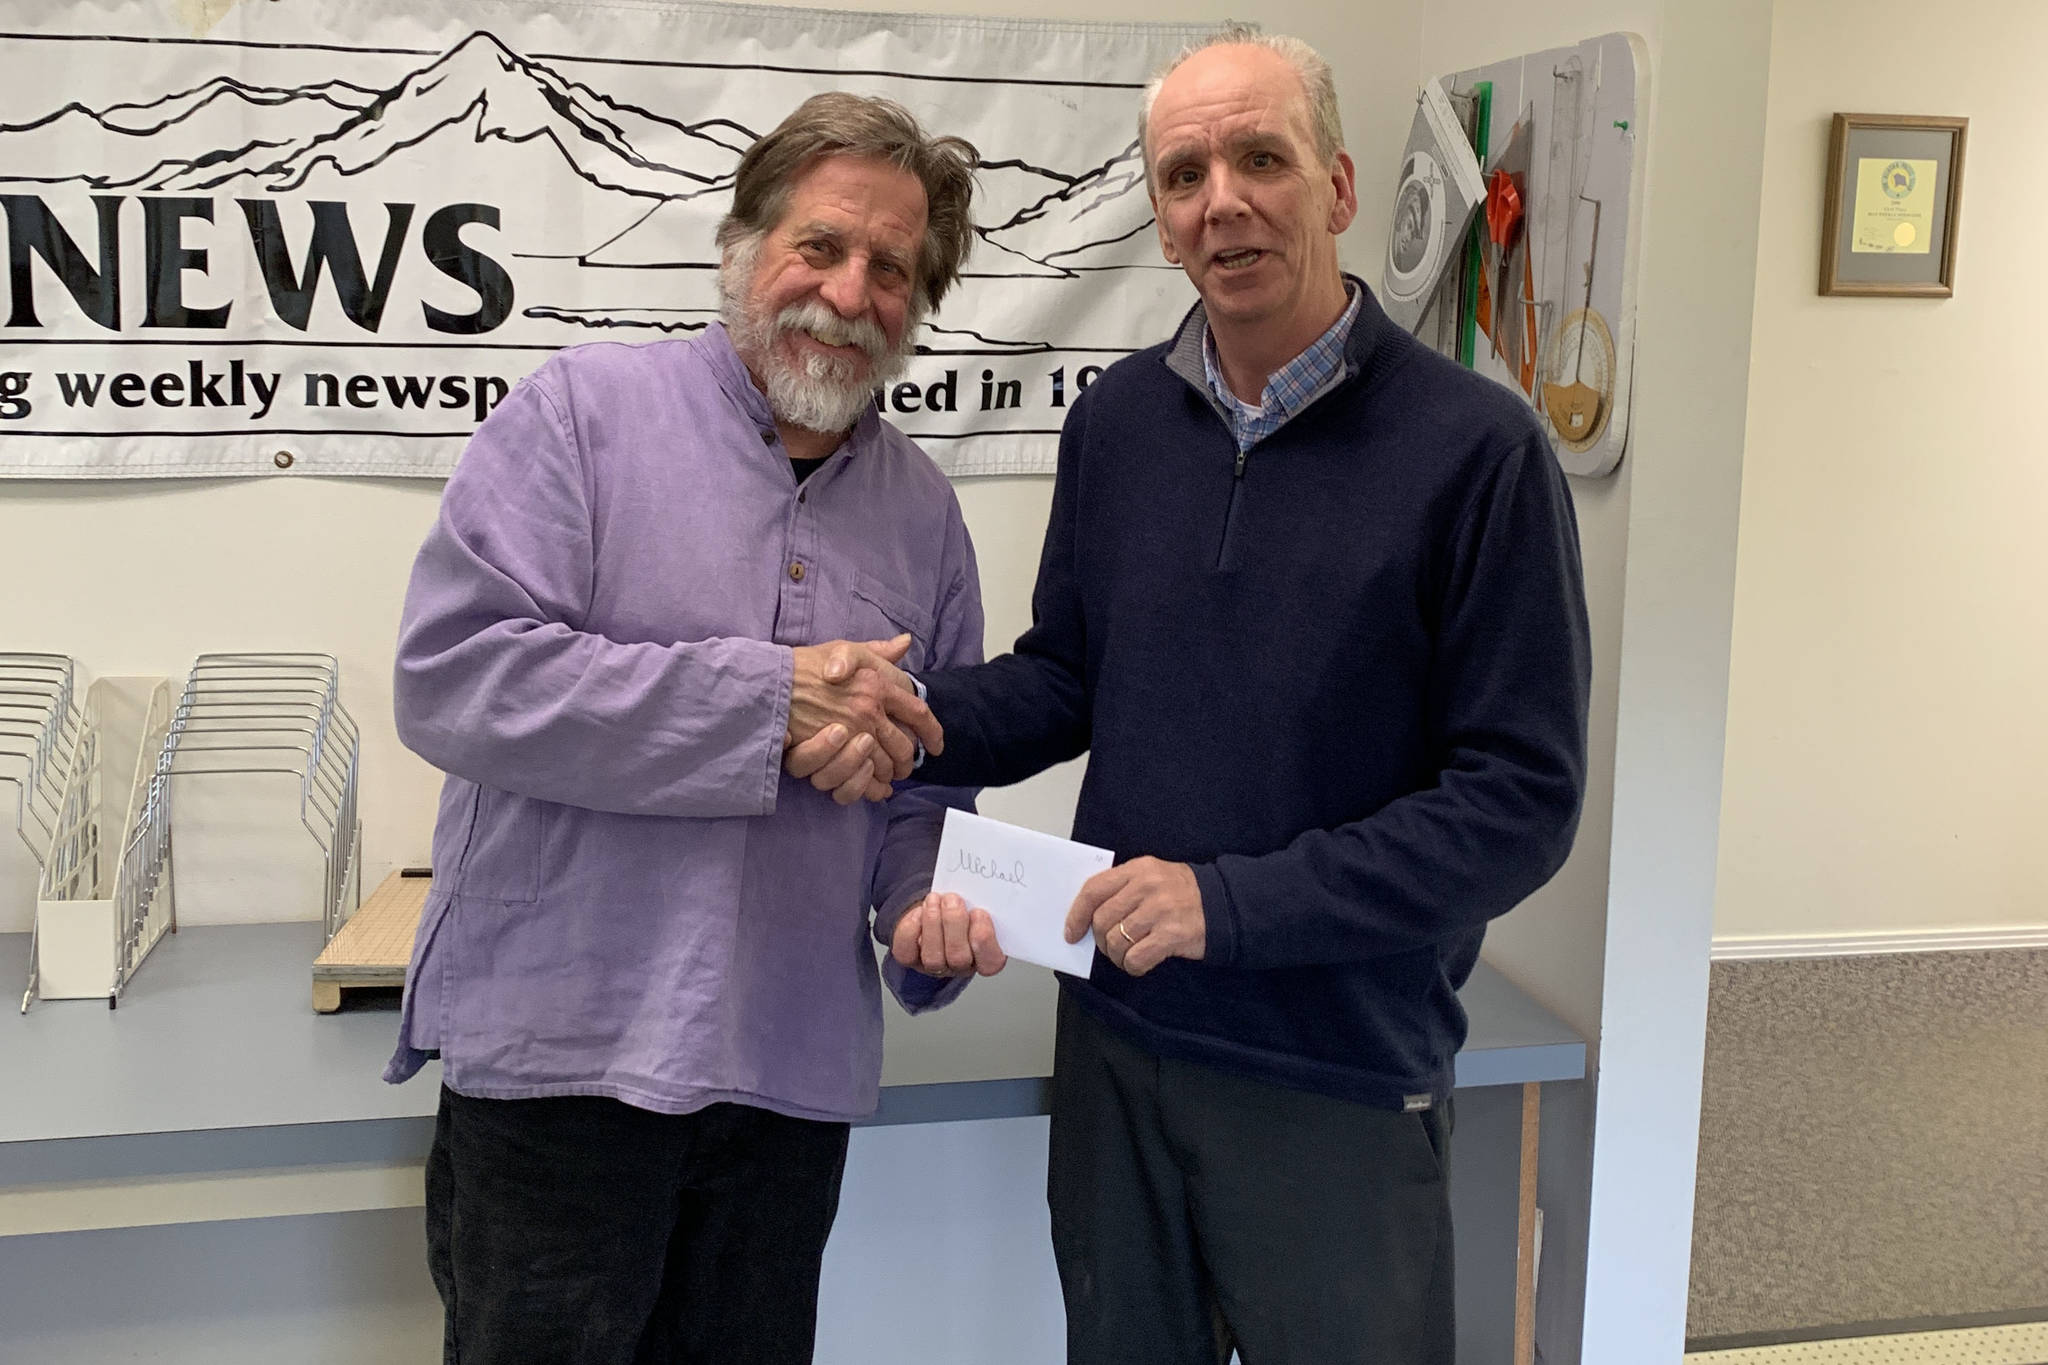 Homer News Editor Michael Armstrong, left, is presented with an award from Publisher Jeff Hayden on May 10, 2019 at the Homer News office in Homer, Alaska. (Photo by Malia Anderson)